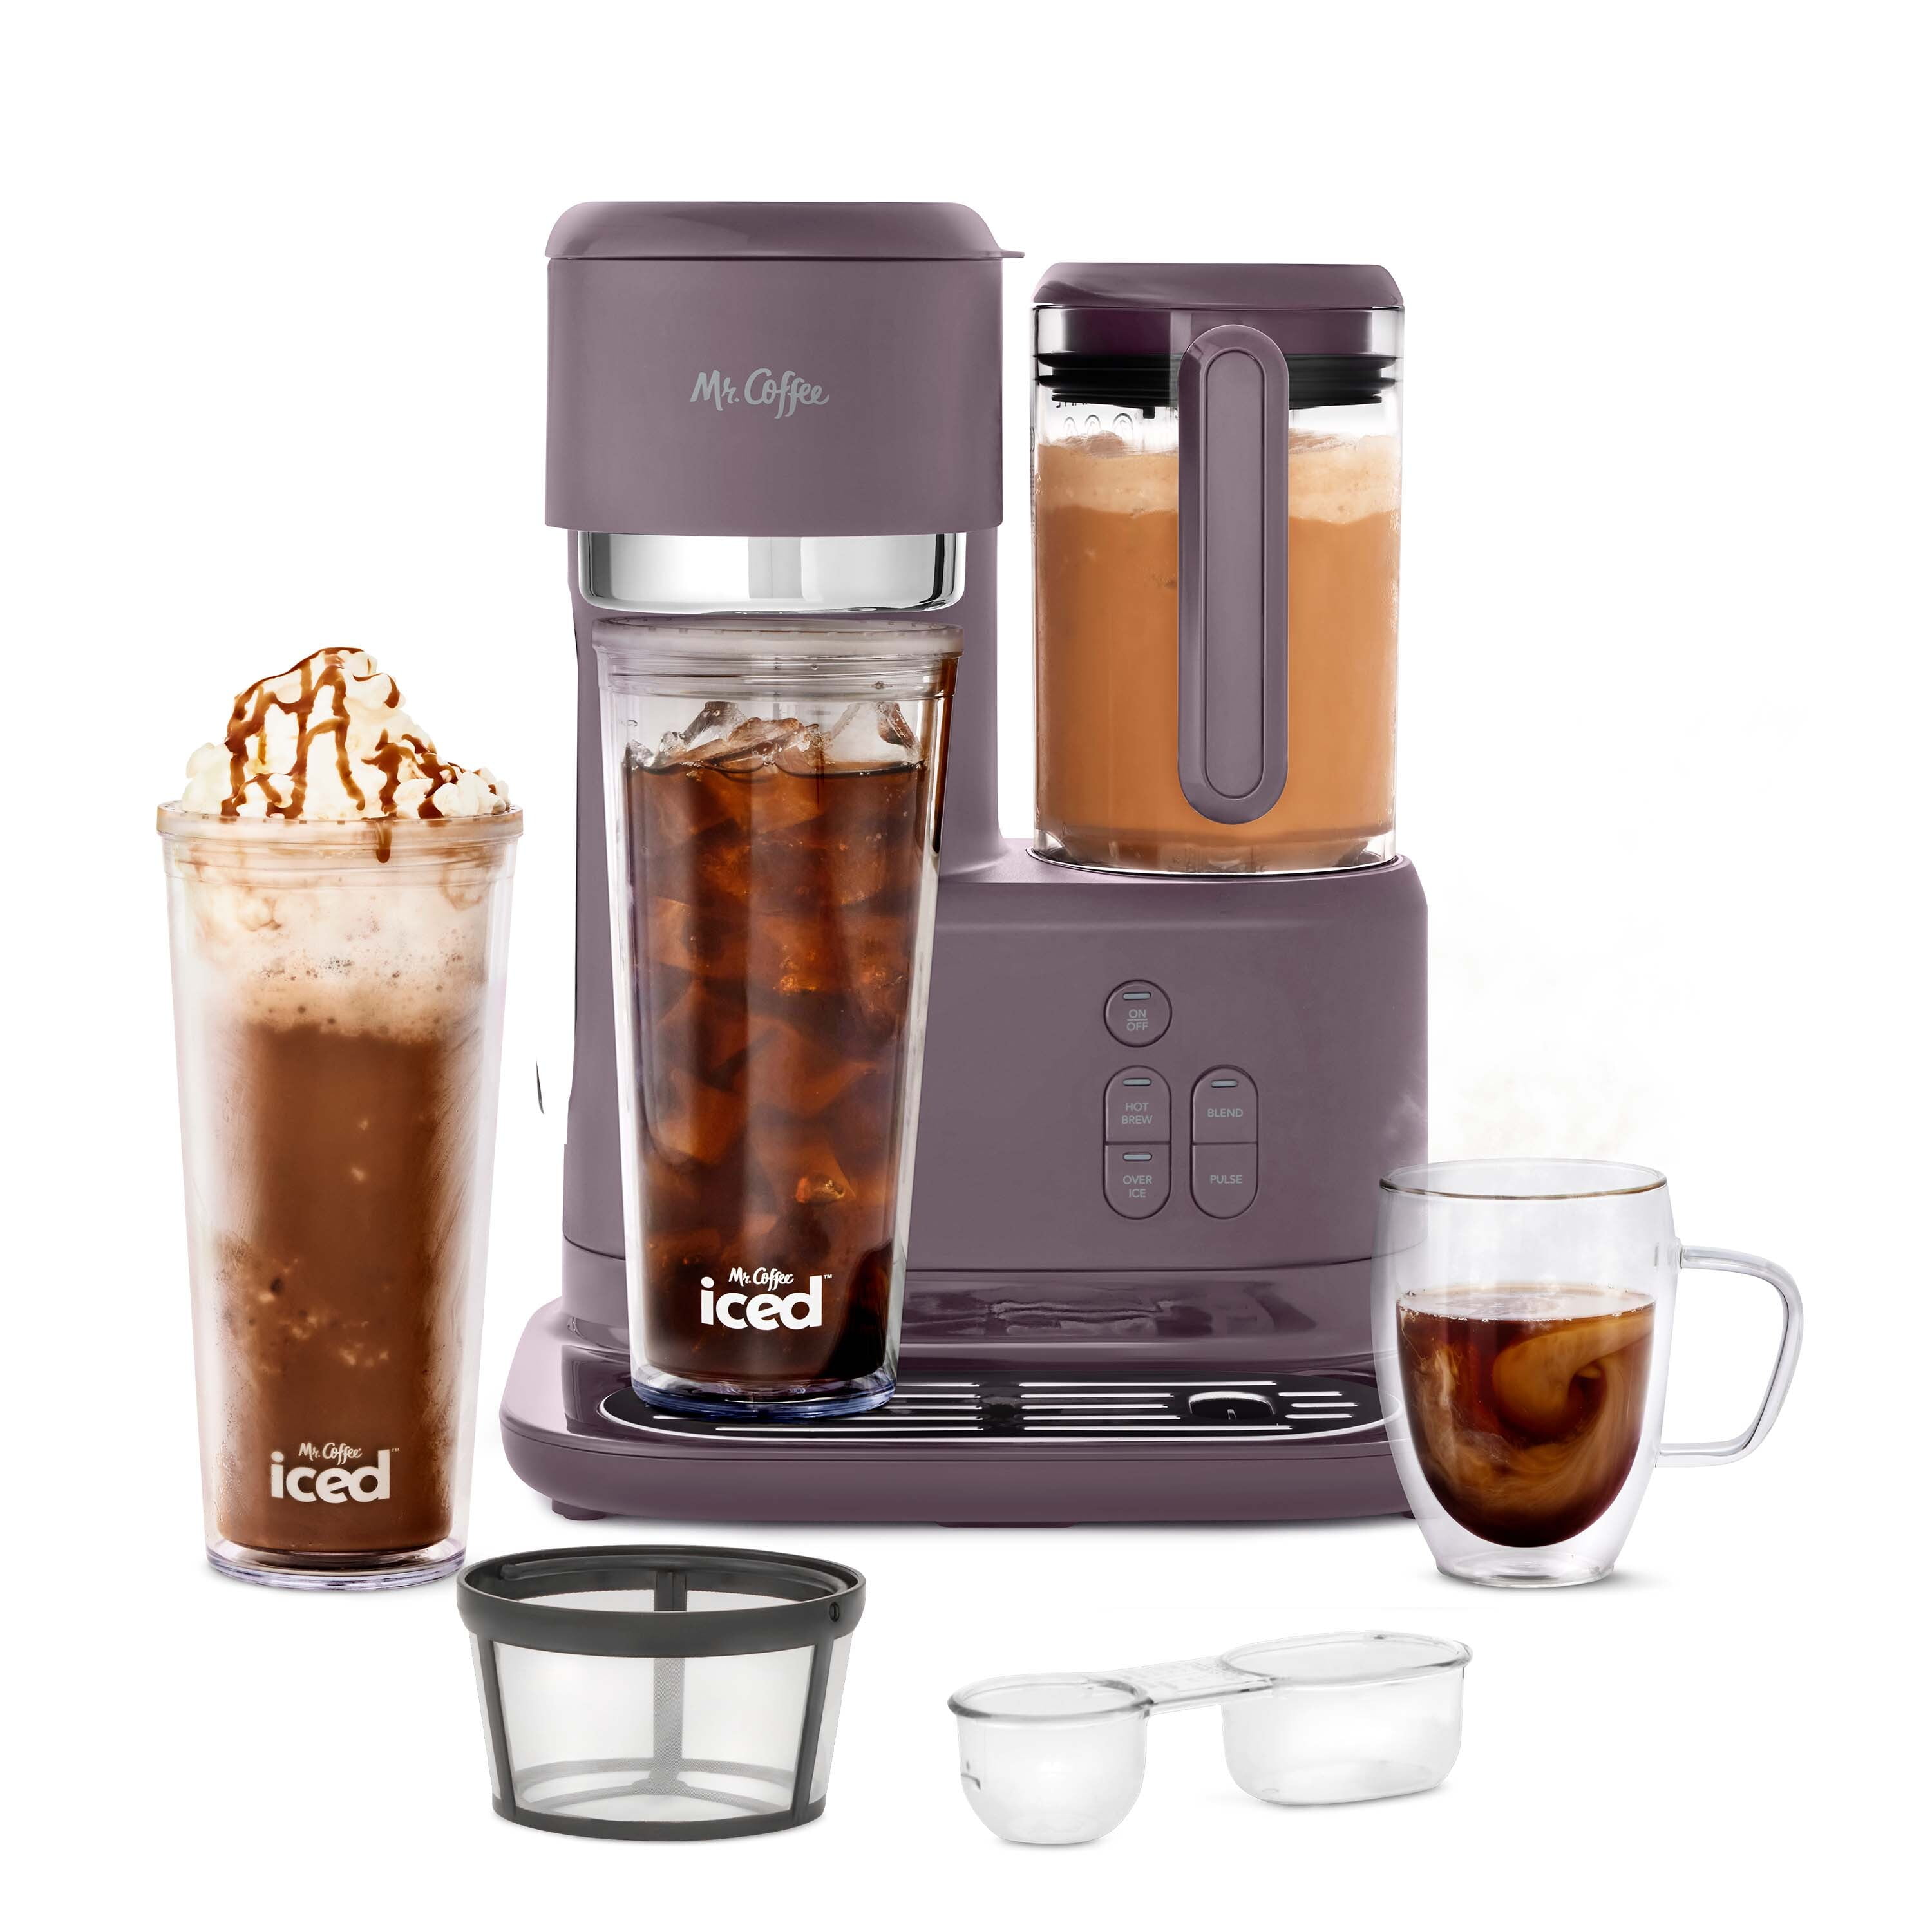 Mr. Coffee Iced Coffee Maker Review! 